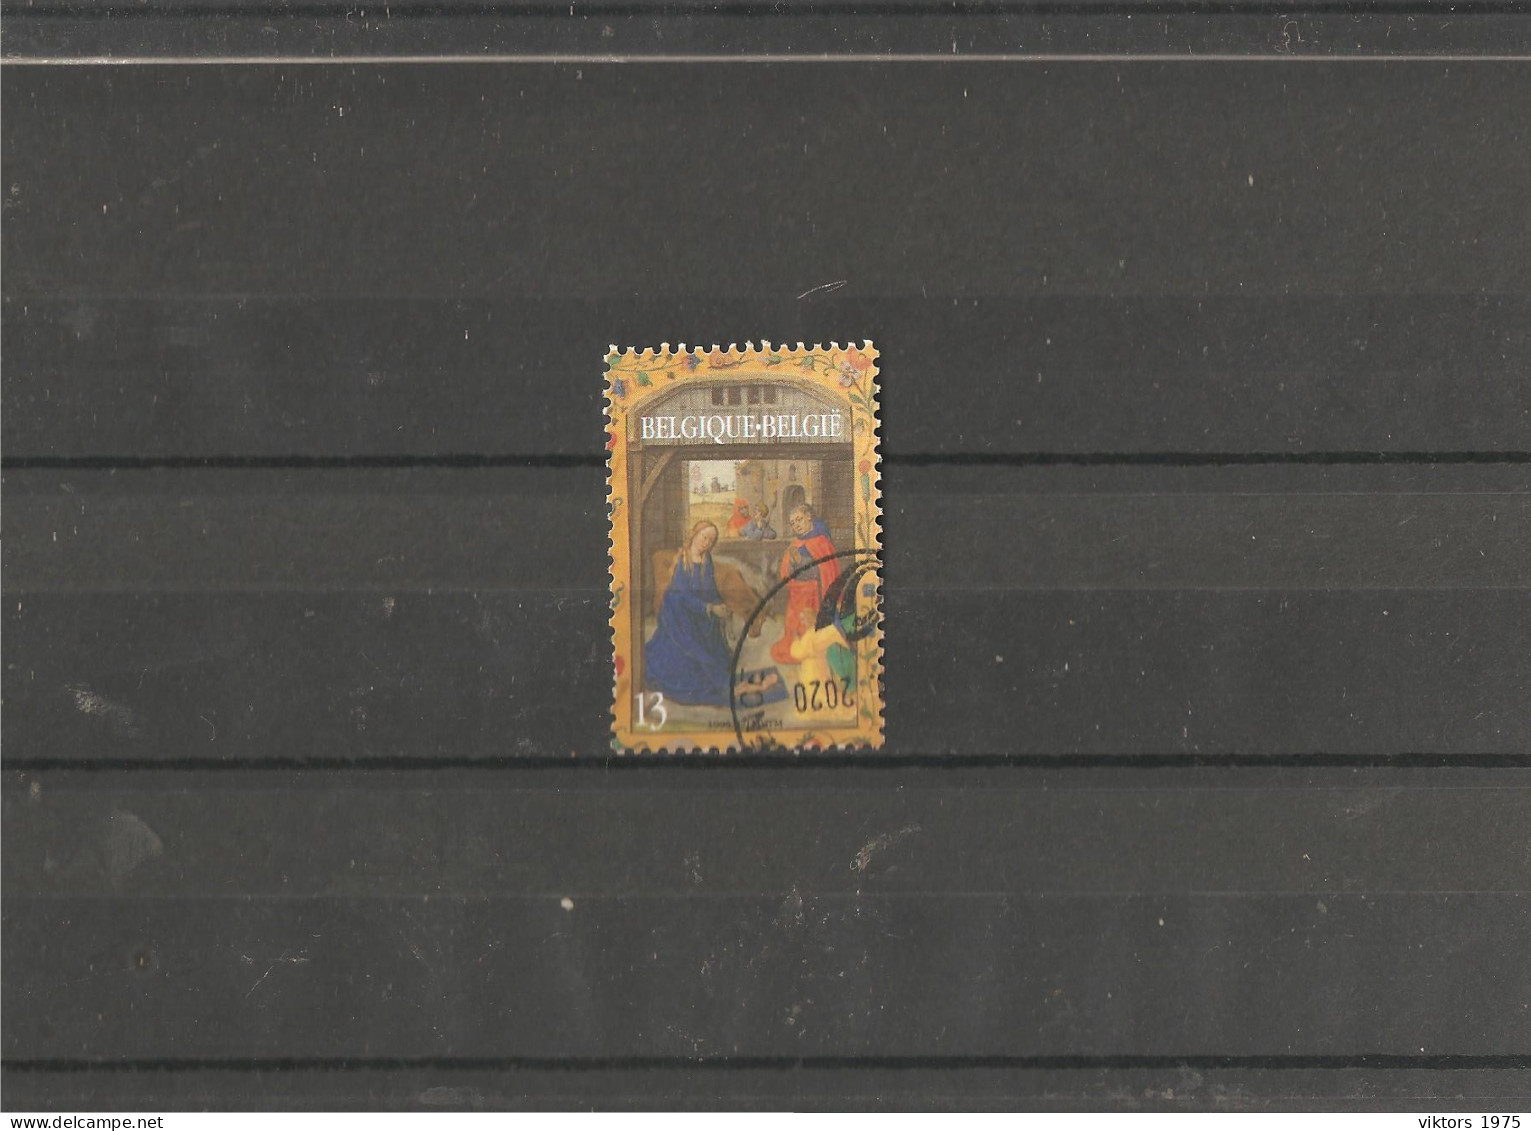 Used Stamp Nr.2674 In MICHEL Catalog - Used Stamps